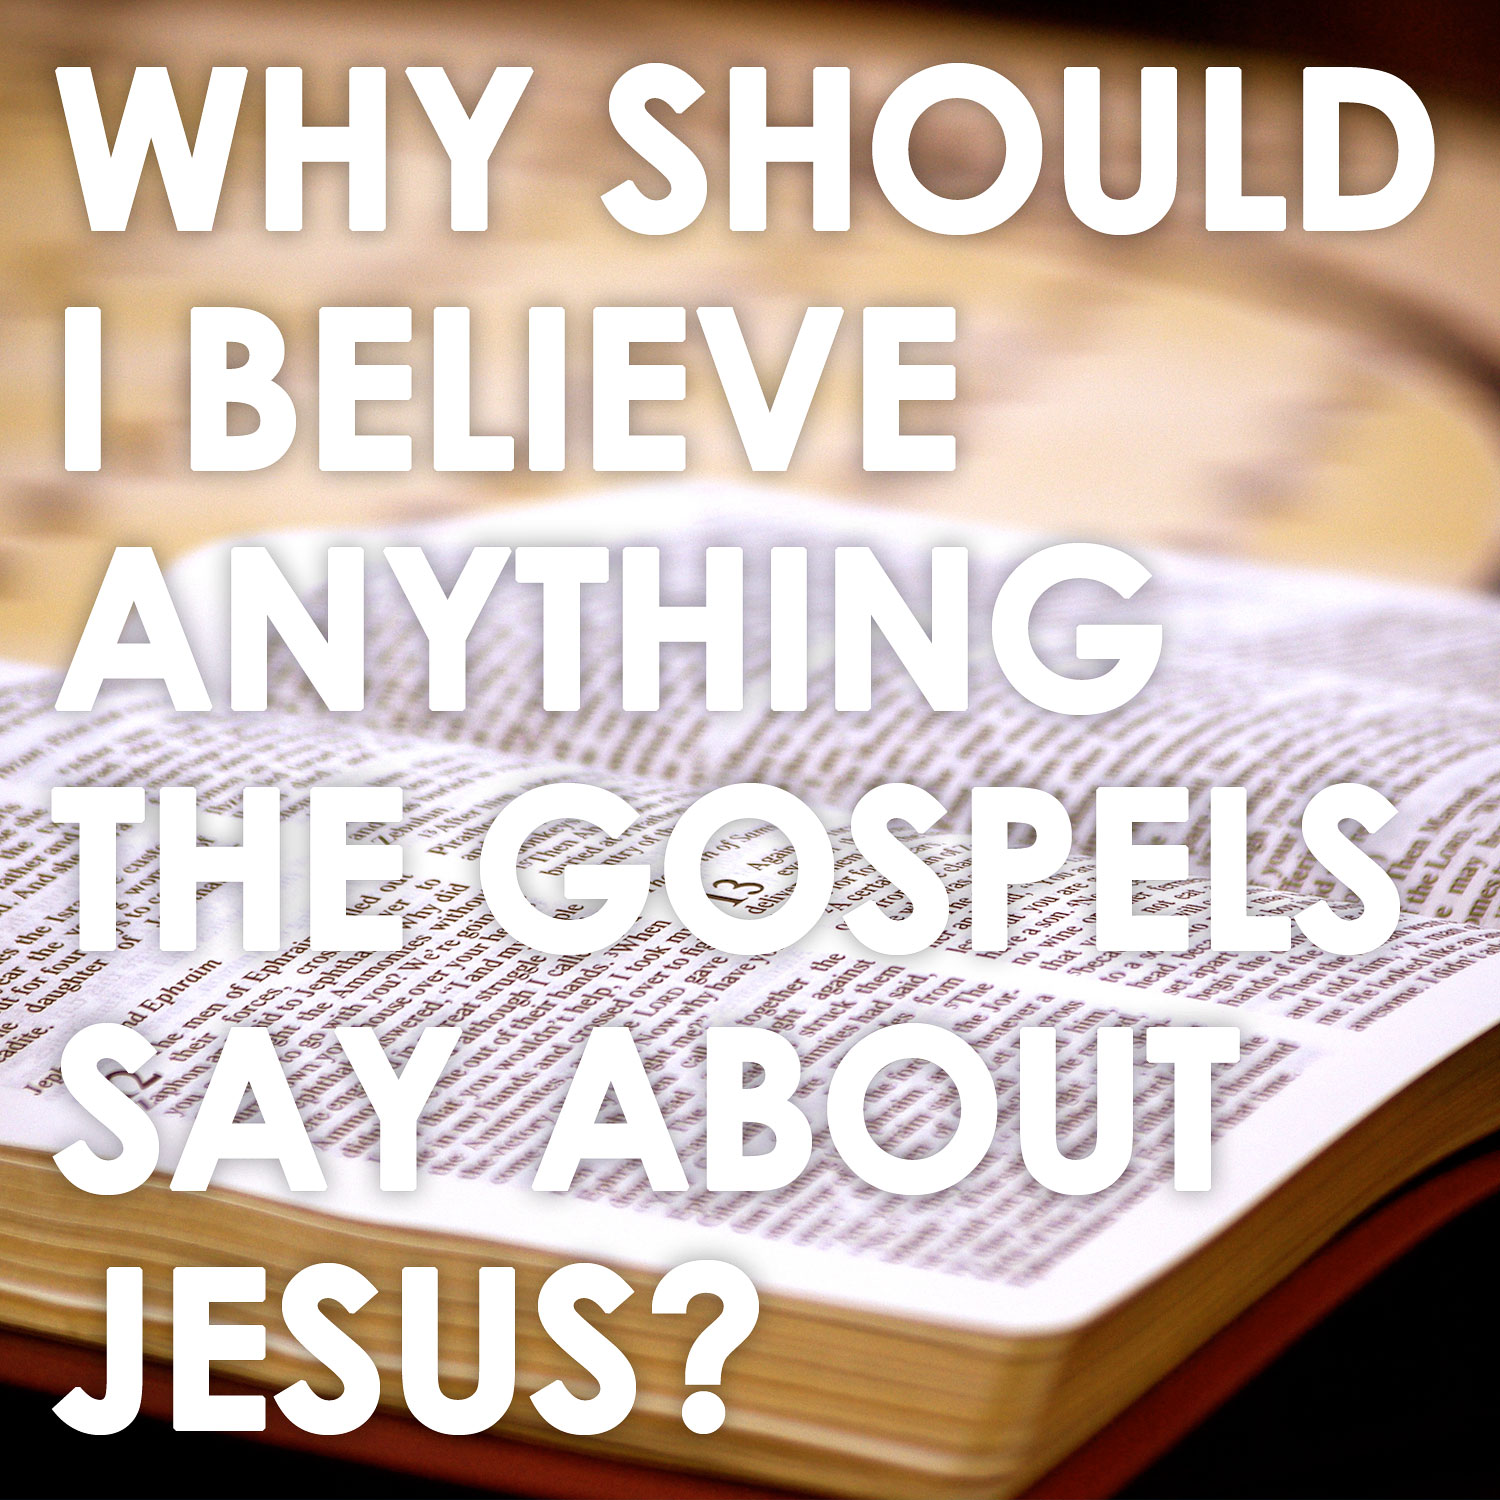 Why Should I Believe Anything The Gospels Say About Jesus? (Part 1)